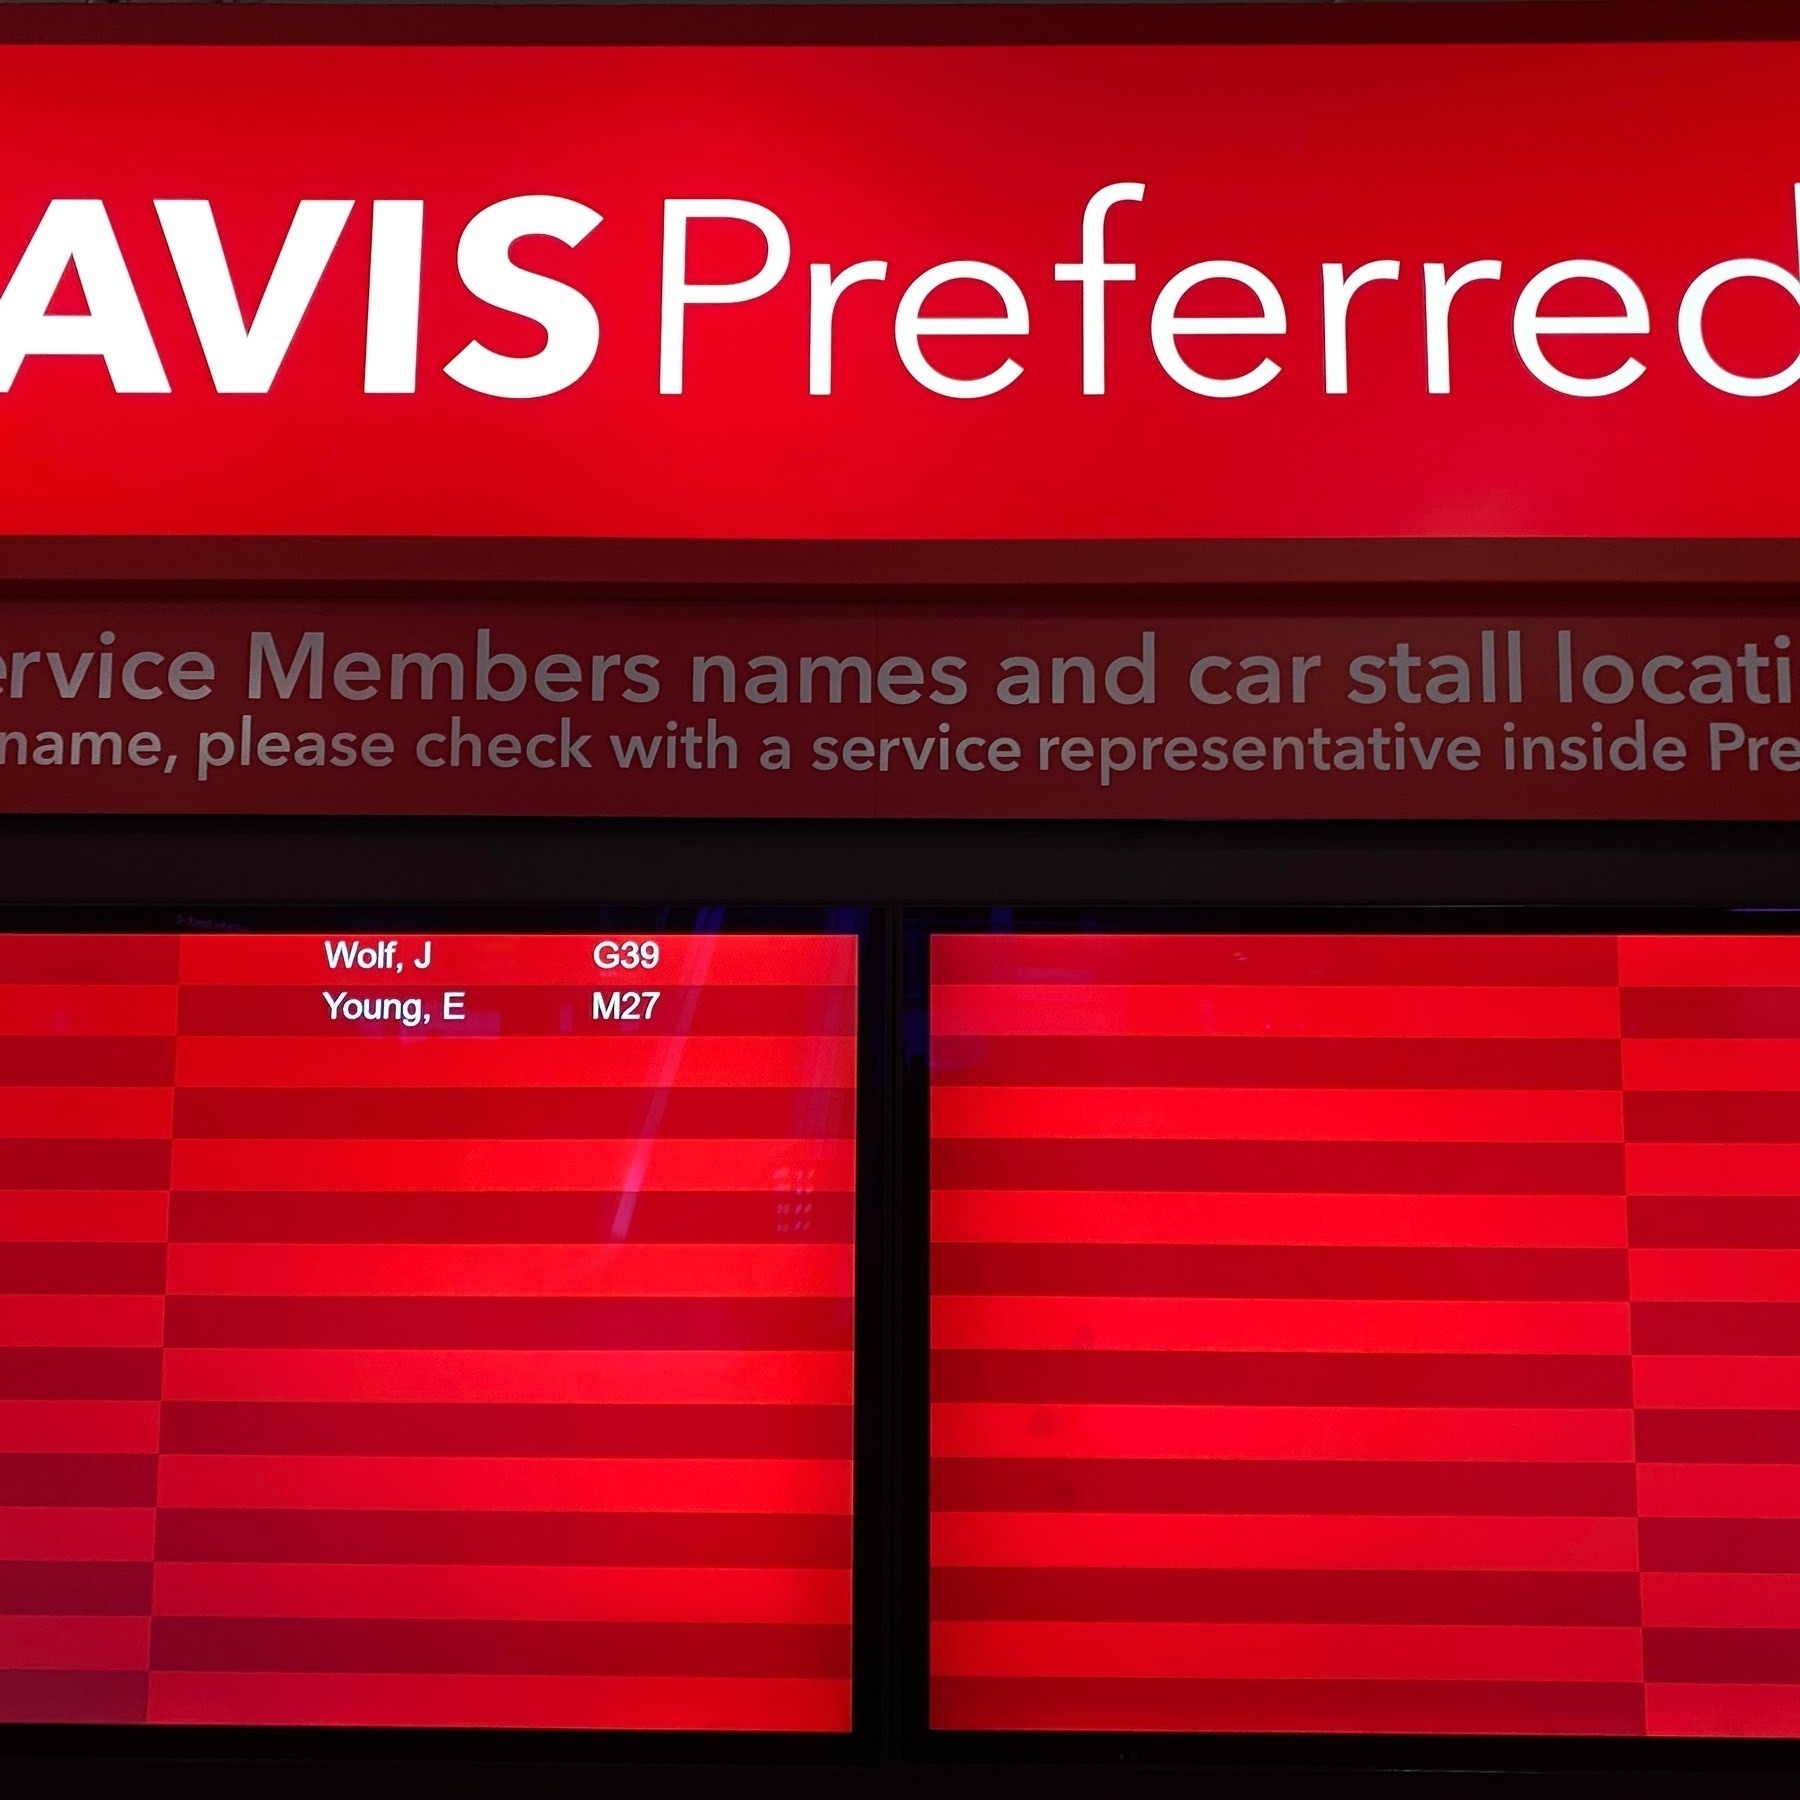 Red sign which says "Avis Preferred".